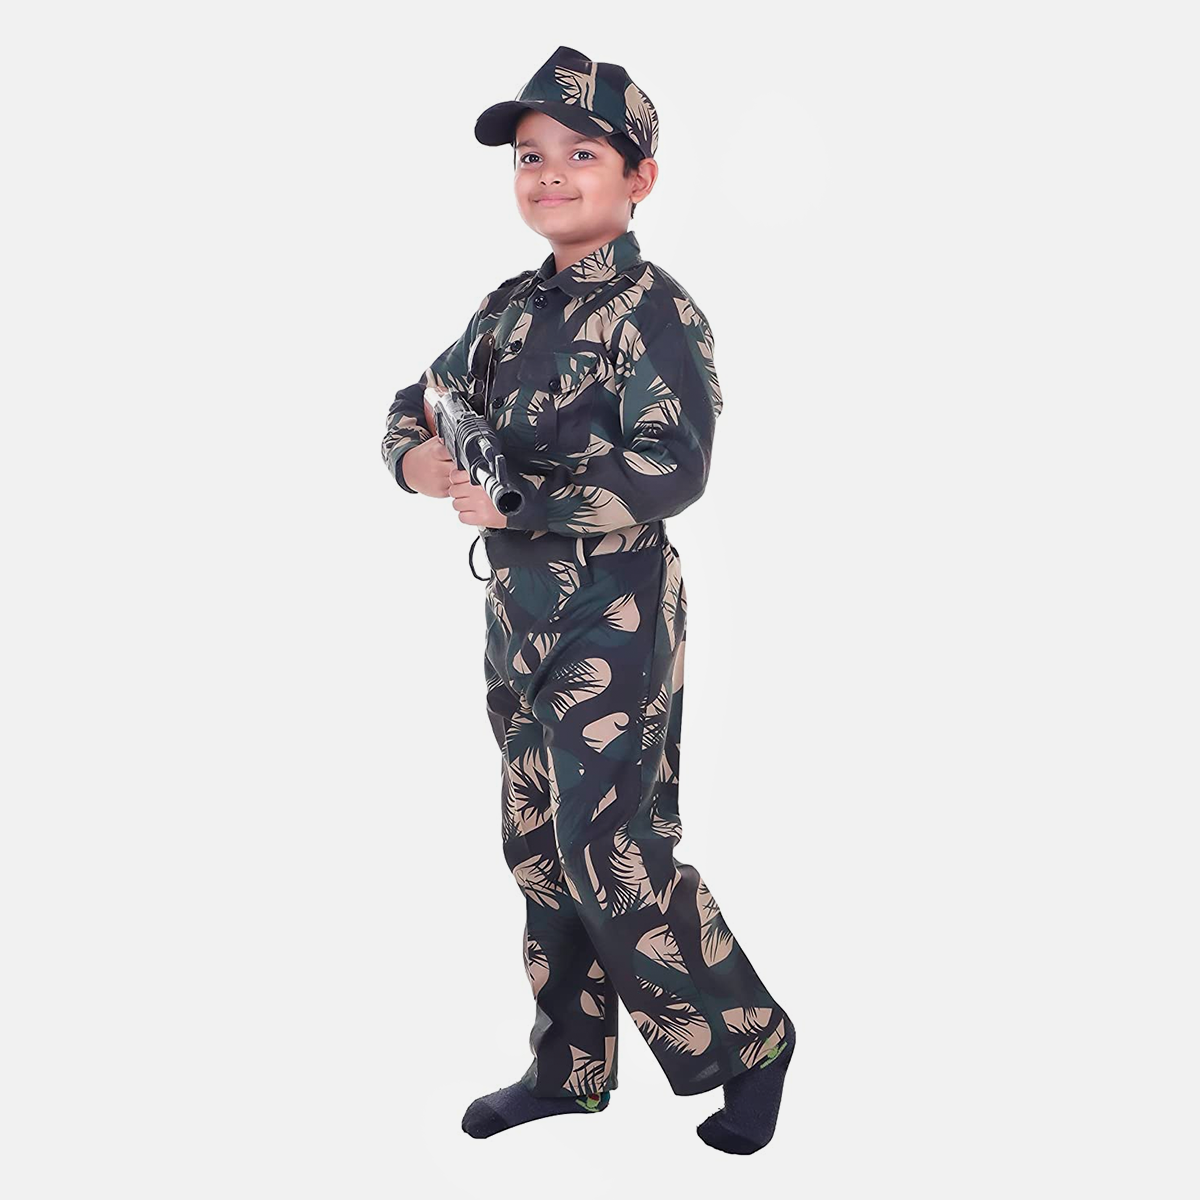 Army Dress for Boys and Girls, Set of 3 with Lightweight Pants, Shirt, Cap, 3Y